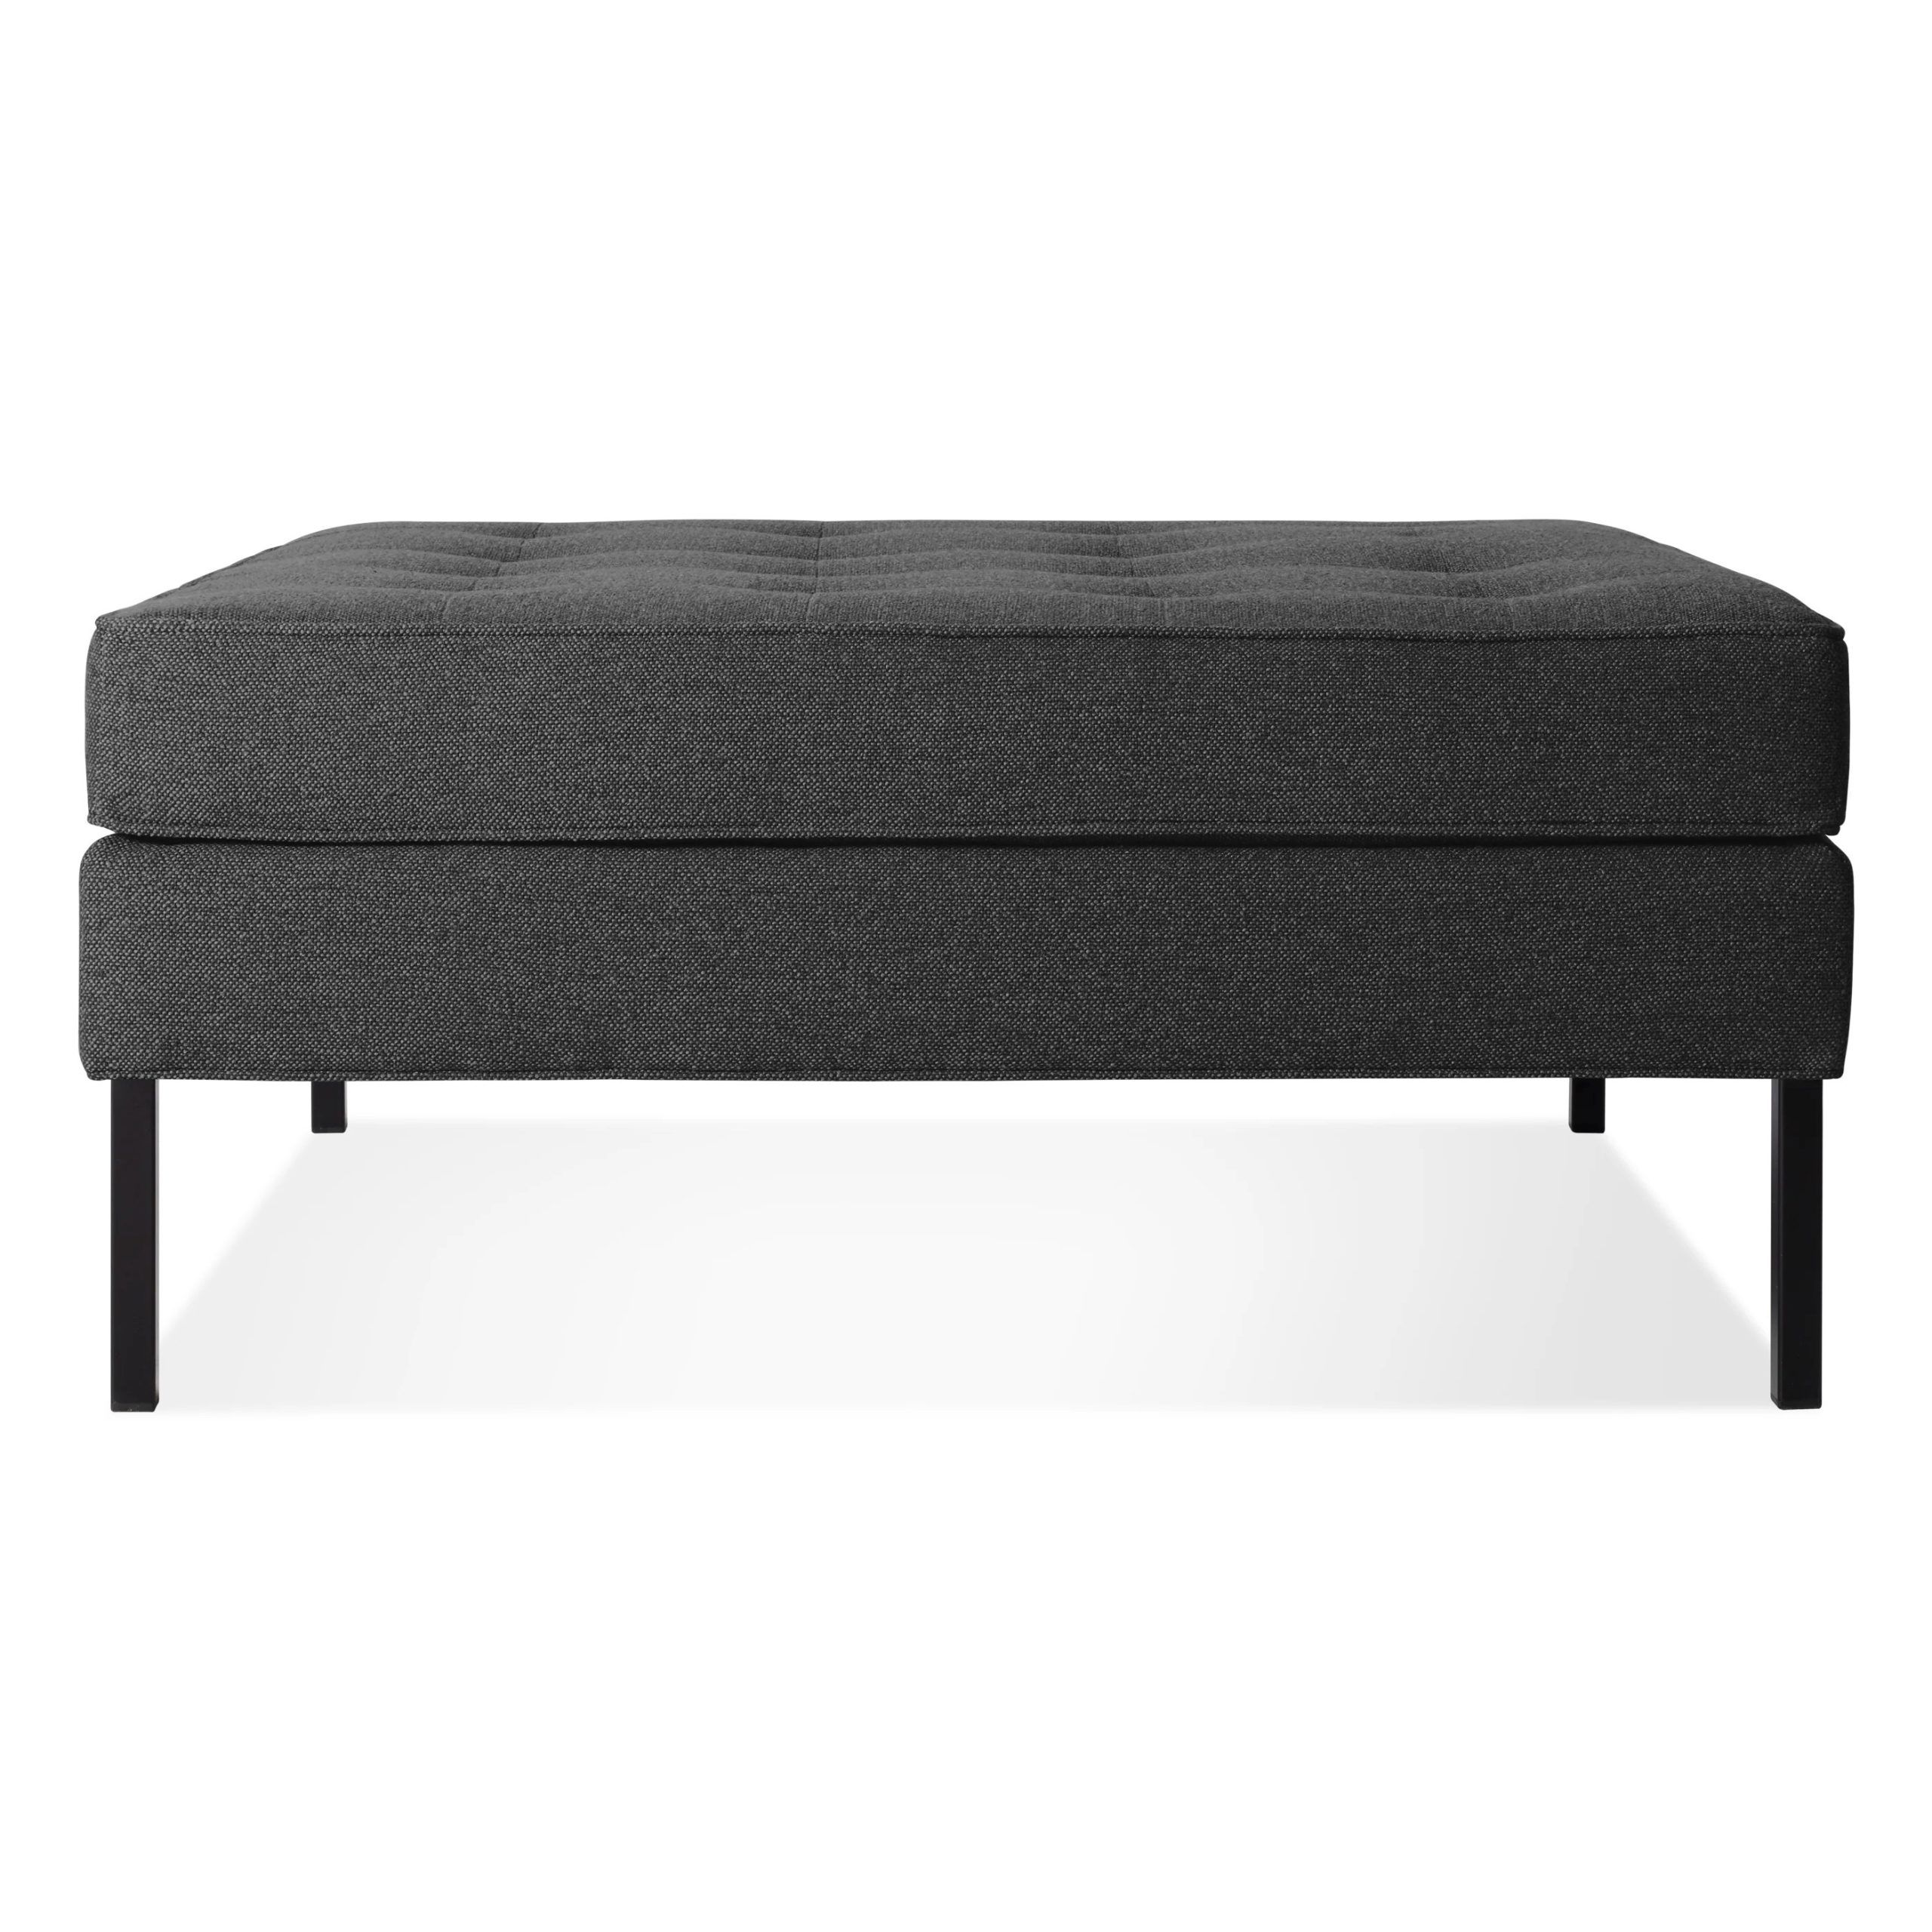 Favorite Blu Dot Paramount Large Square Ottoman With Charcoal Dot Ottomans (View 1 of 15)